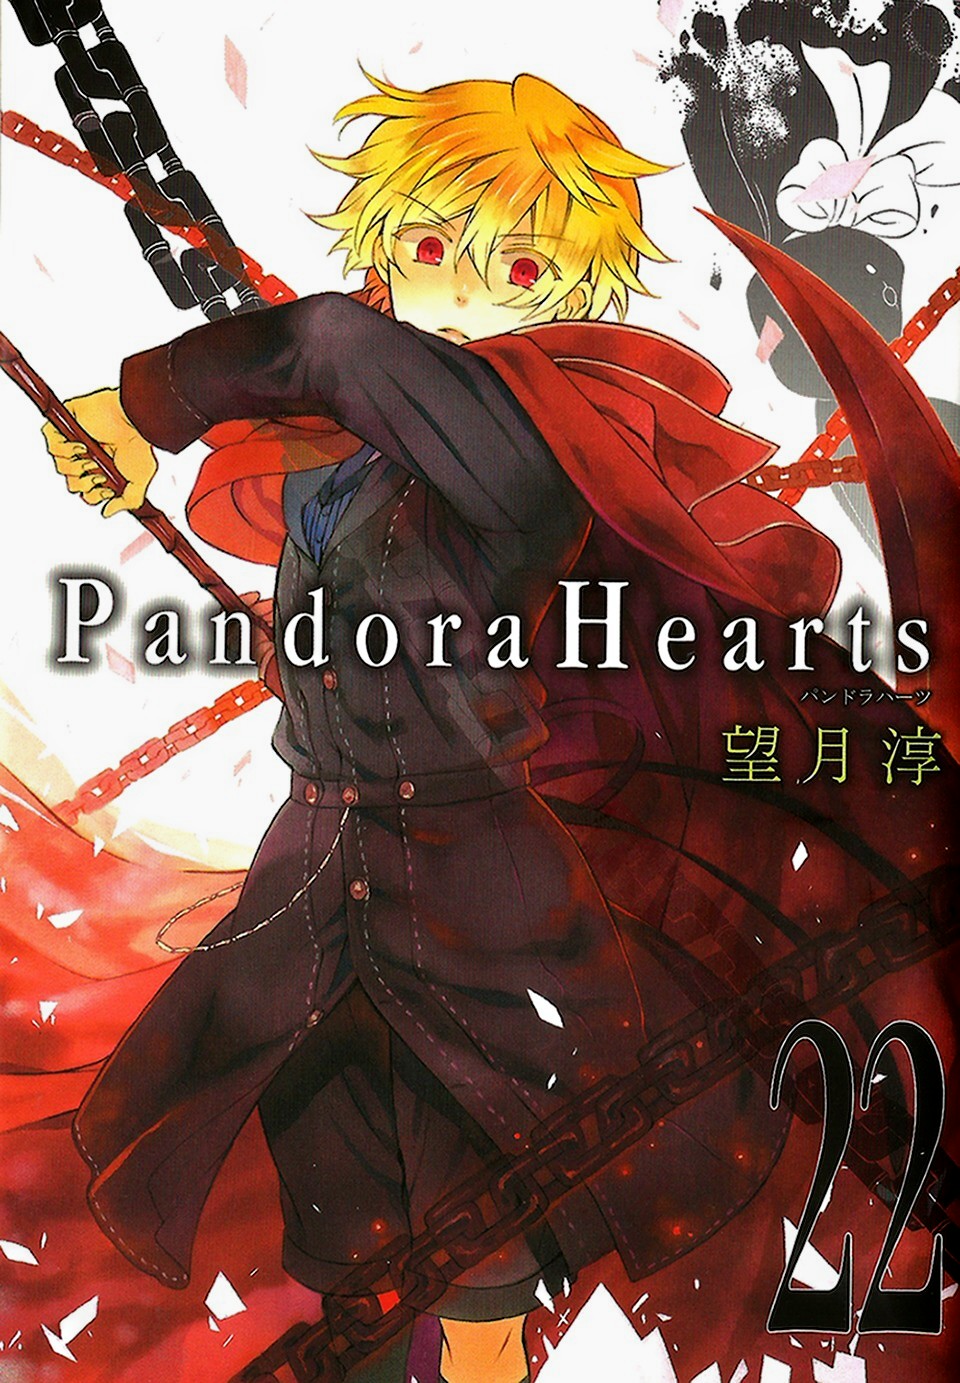 Info - Volume Covers Thread - Part 1, Page 76